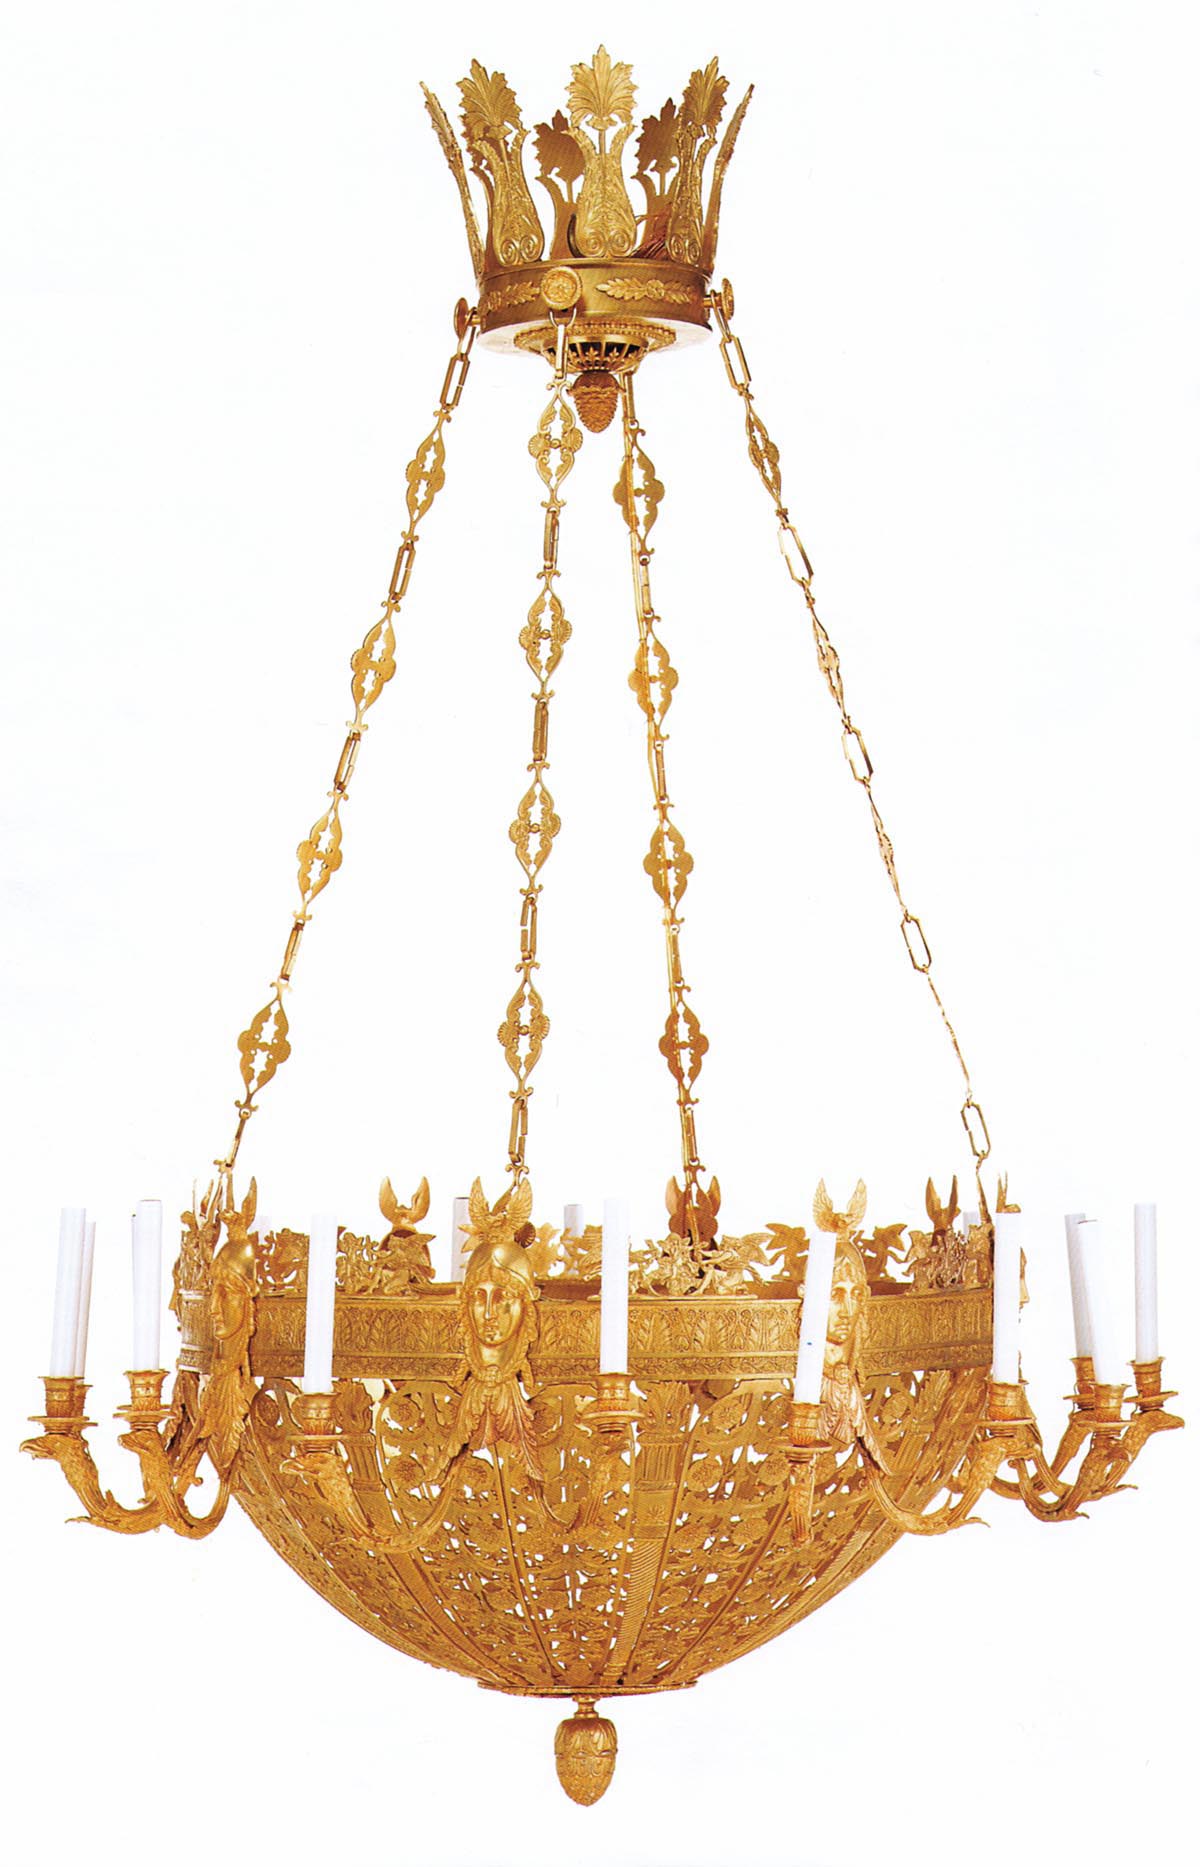 Very fine, Empire style, gilt-bronze, sixteen light chandelier of large dimension